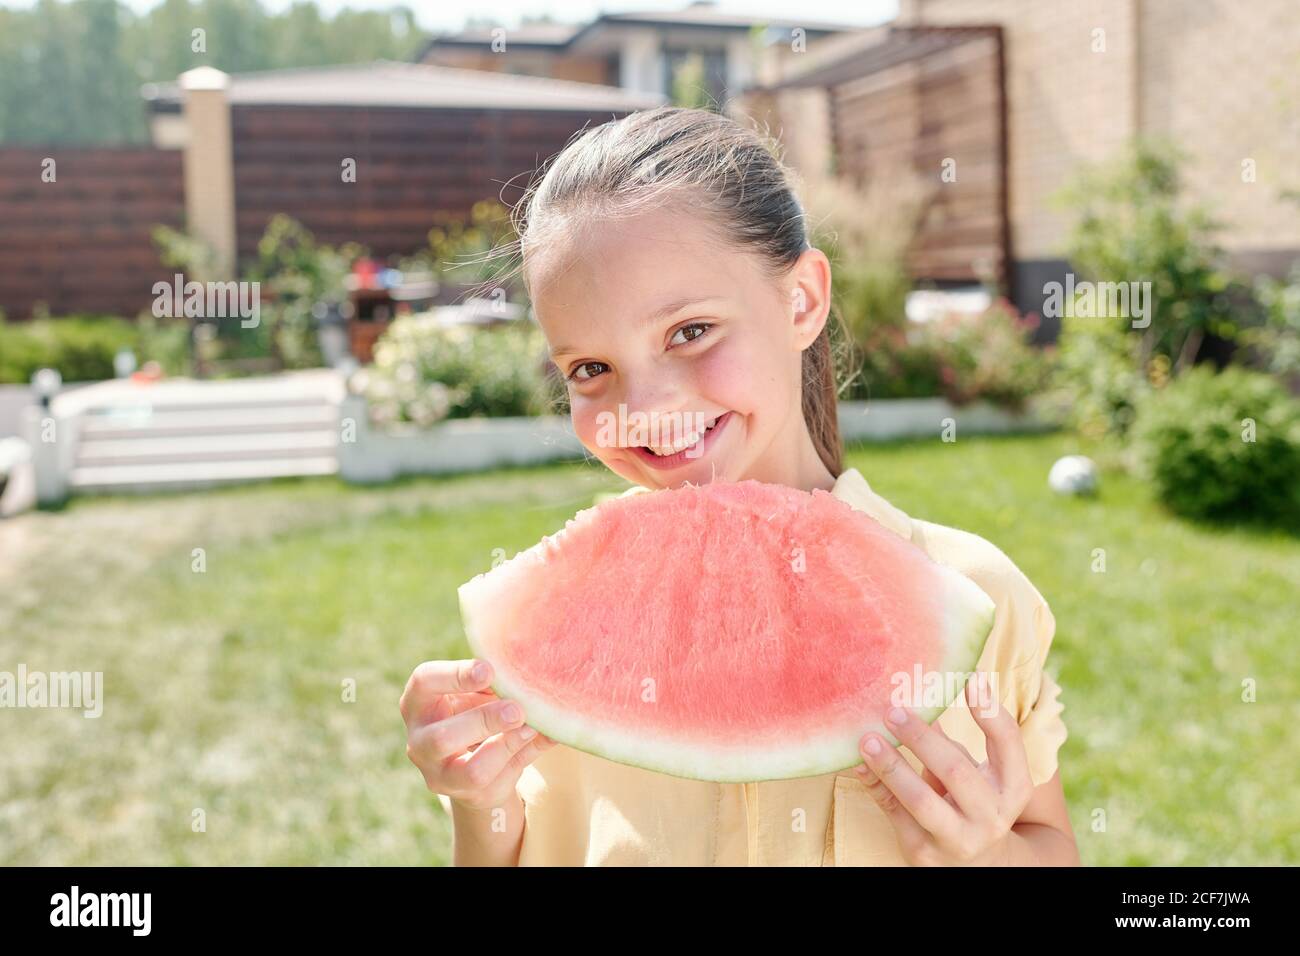 Medium close-up portrait shot of cheerful little girl standing in backyard holding piece of watermelon smiling at camera Stock Photo